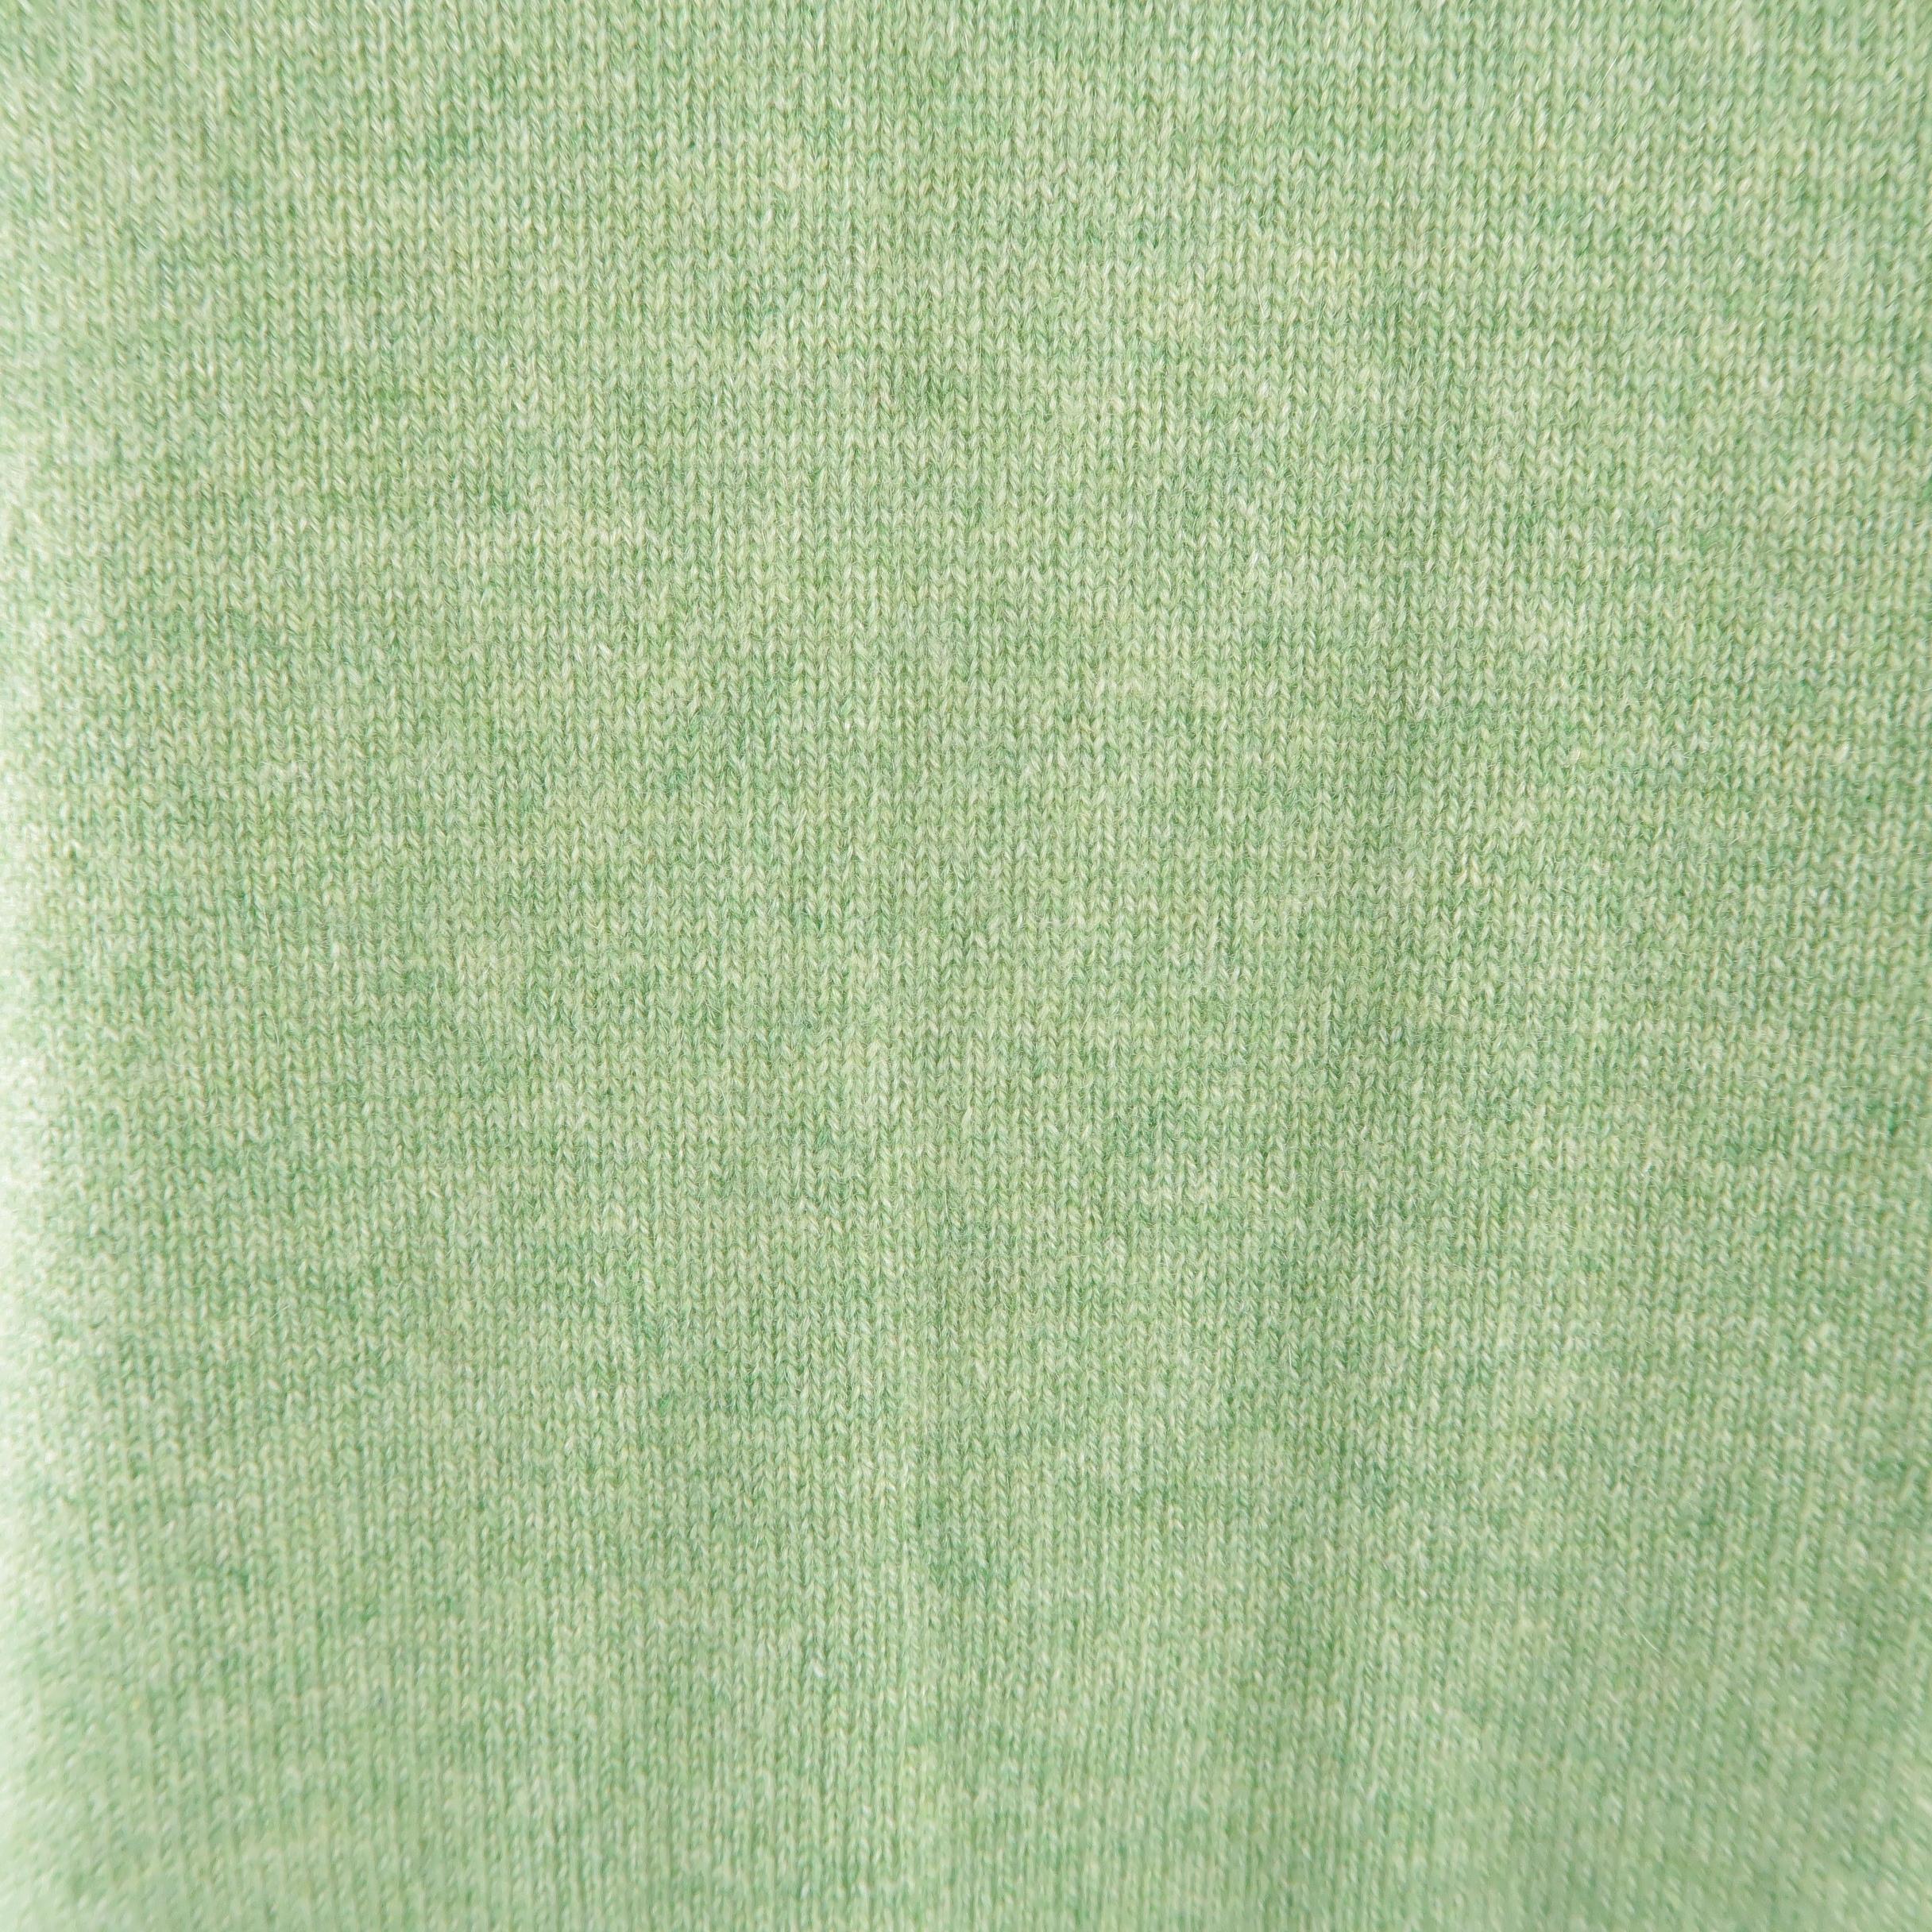 BRUNELLO CUCINELLI Size 44 Green Knitted Cashmere V-neck Sweater 1